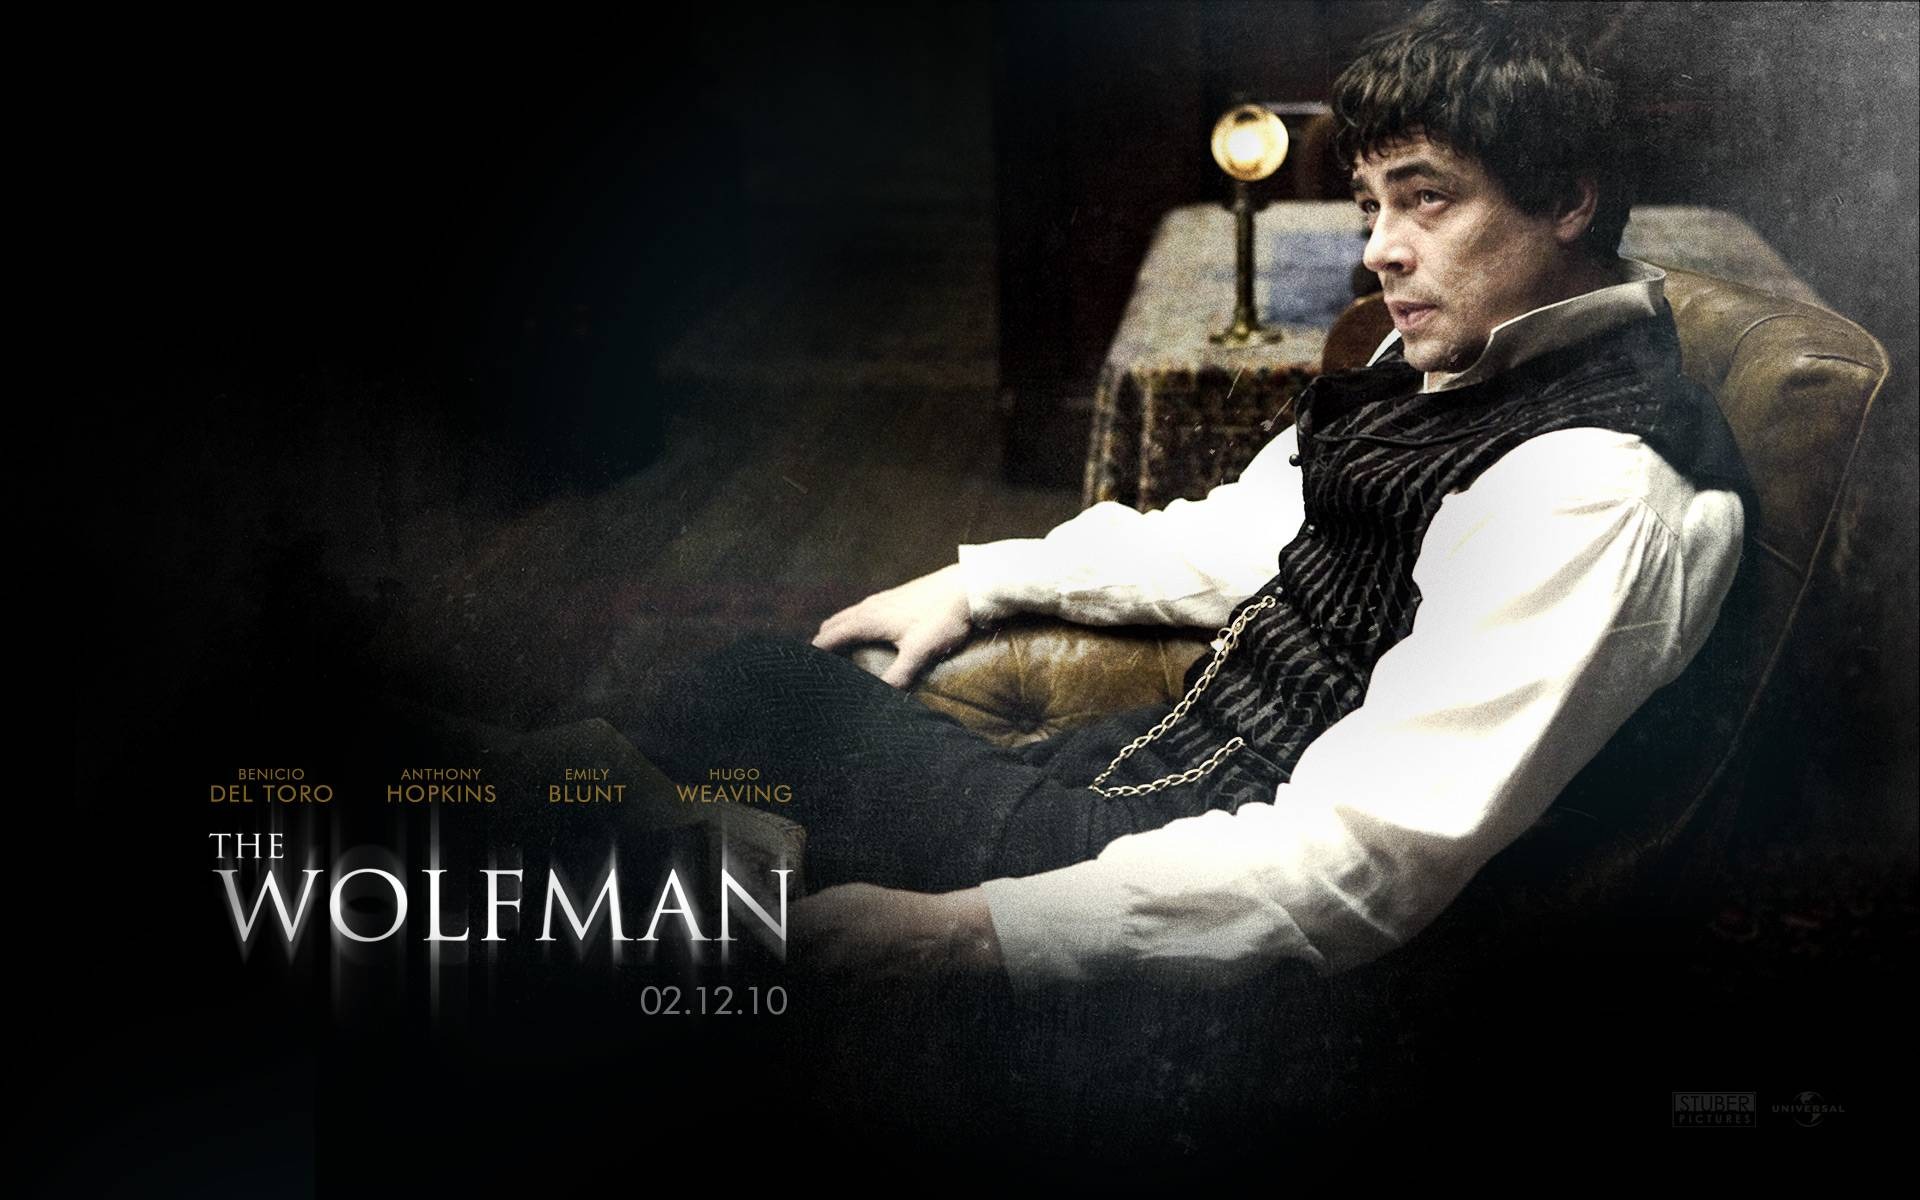 The Wolfman Movie Wallpapers #8 - 1920x1200